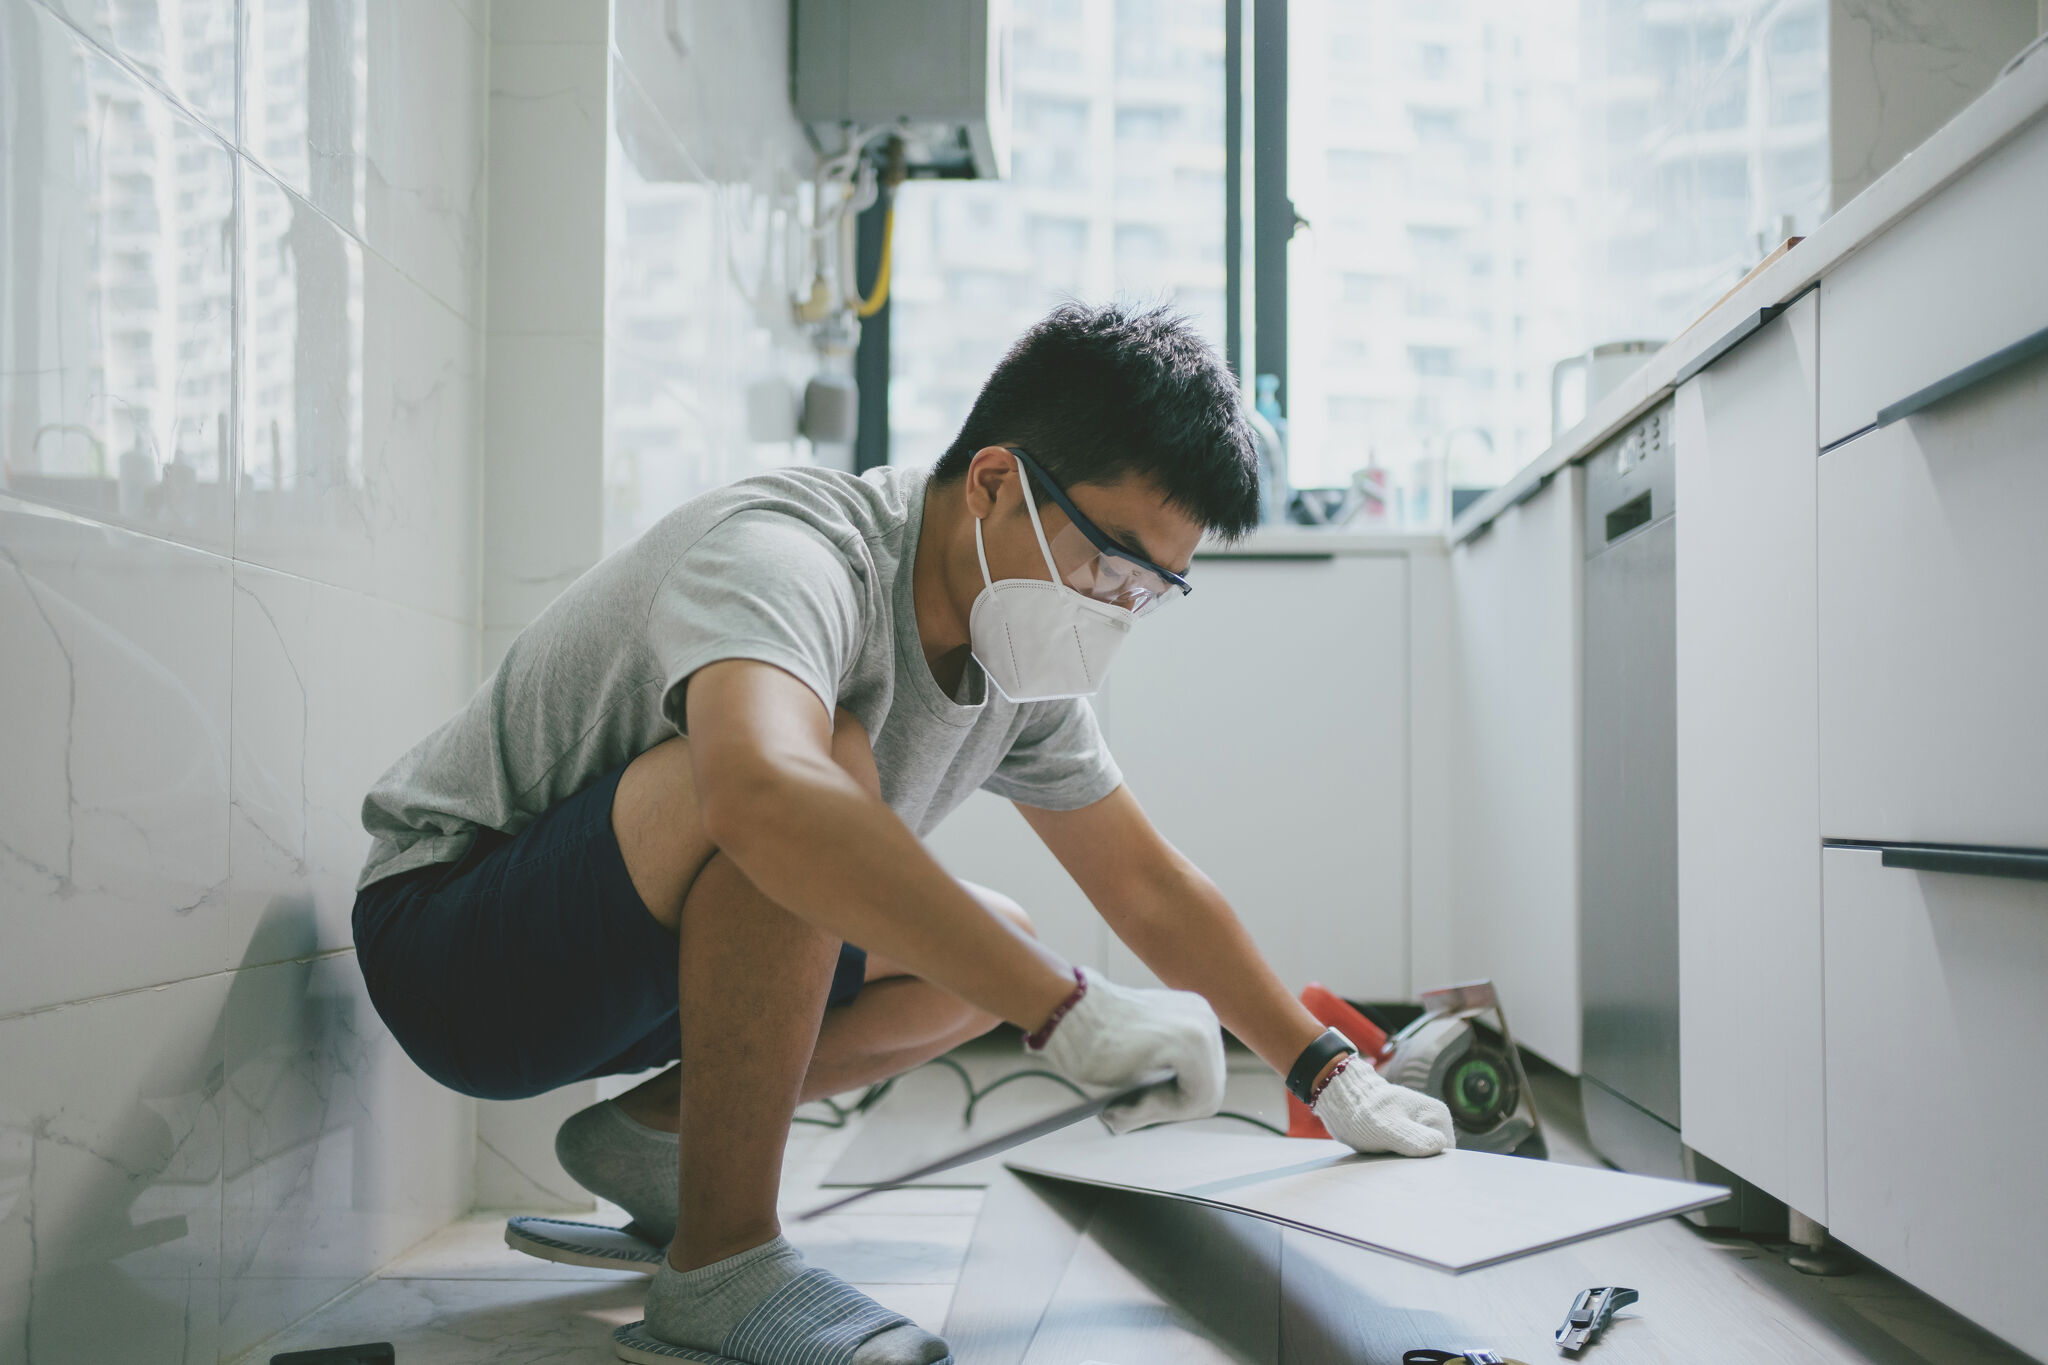 Home life: How to budget realistically for home repairs